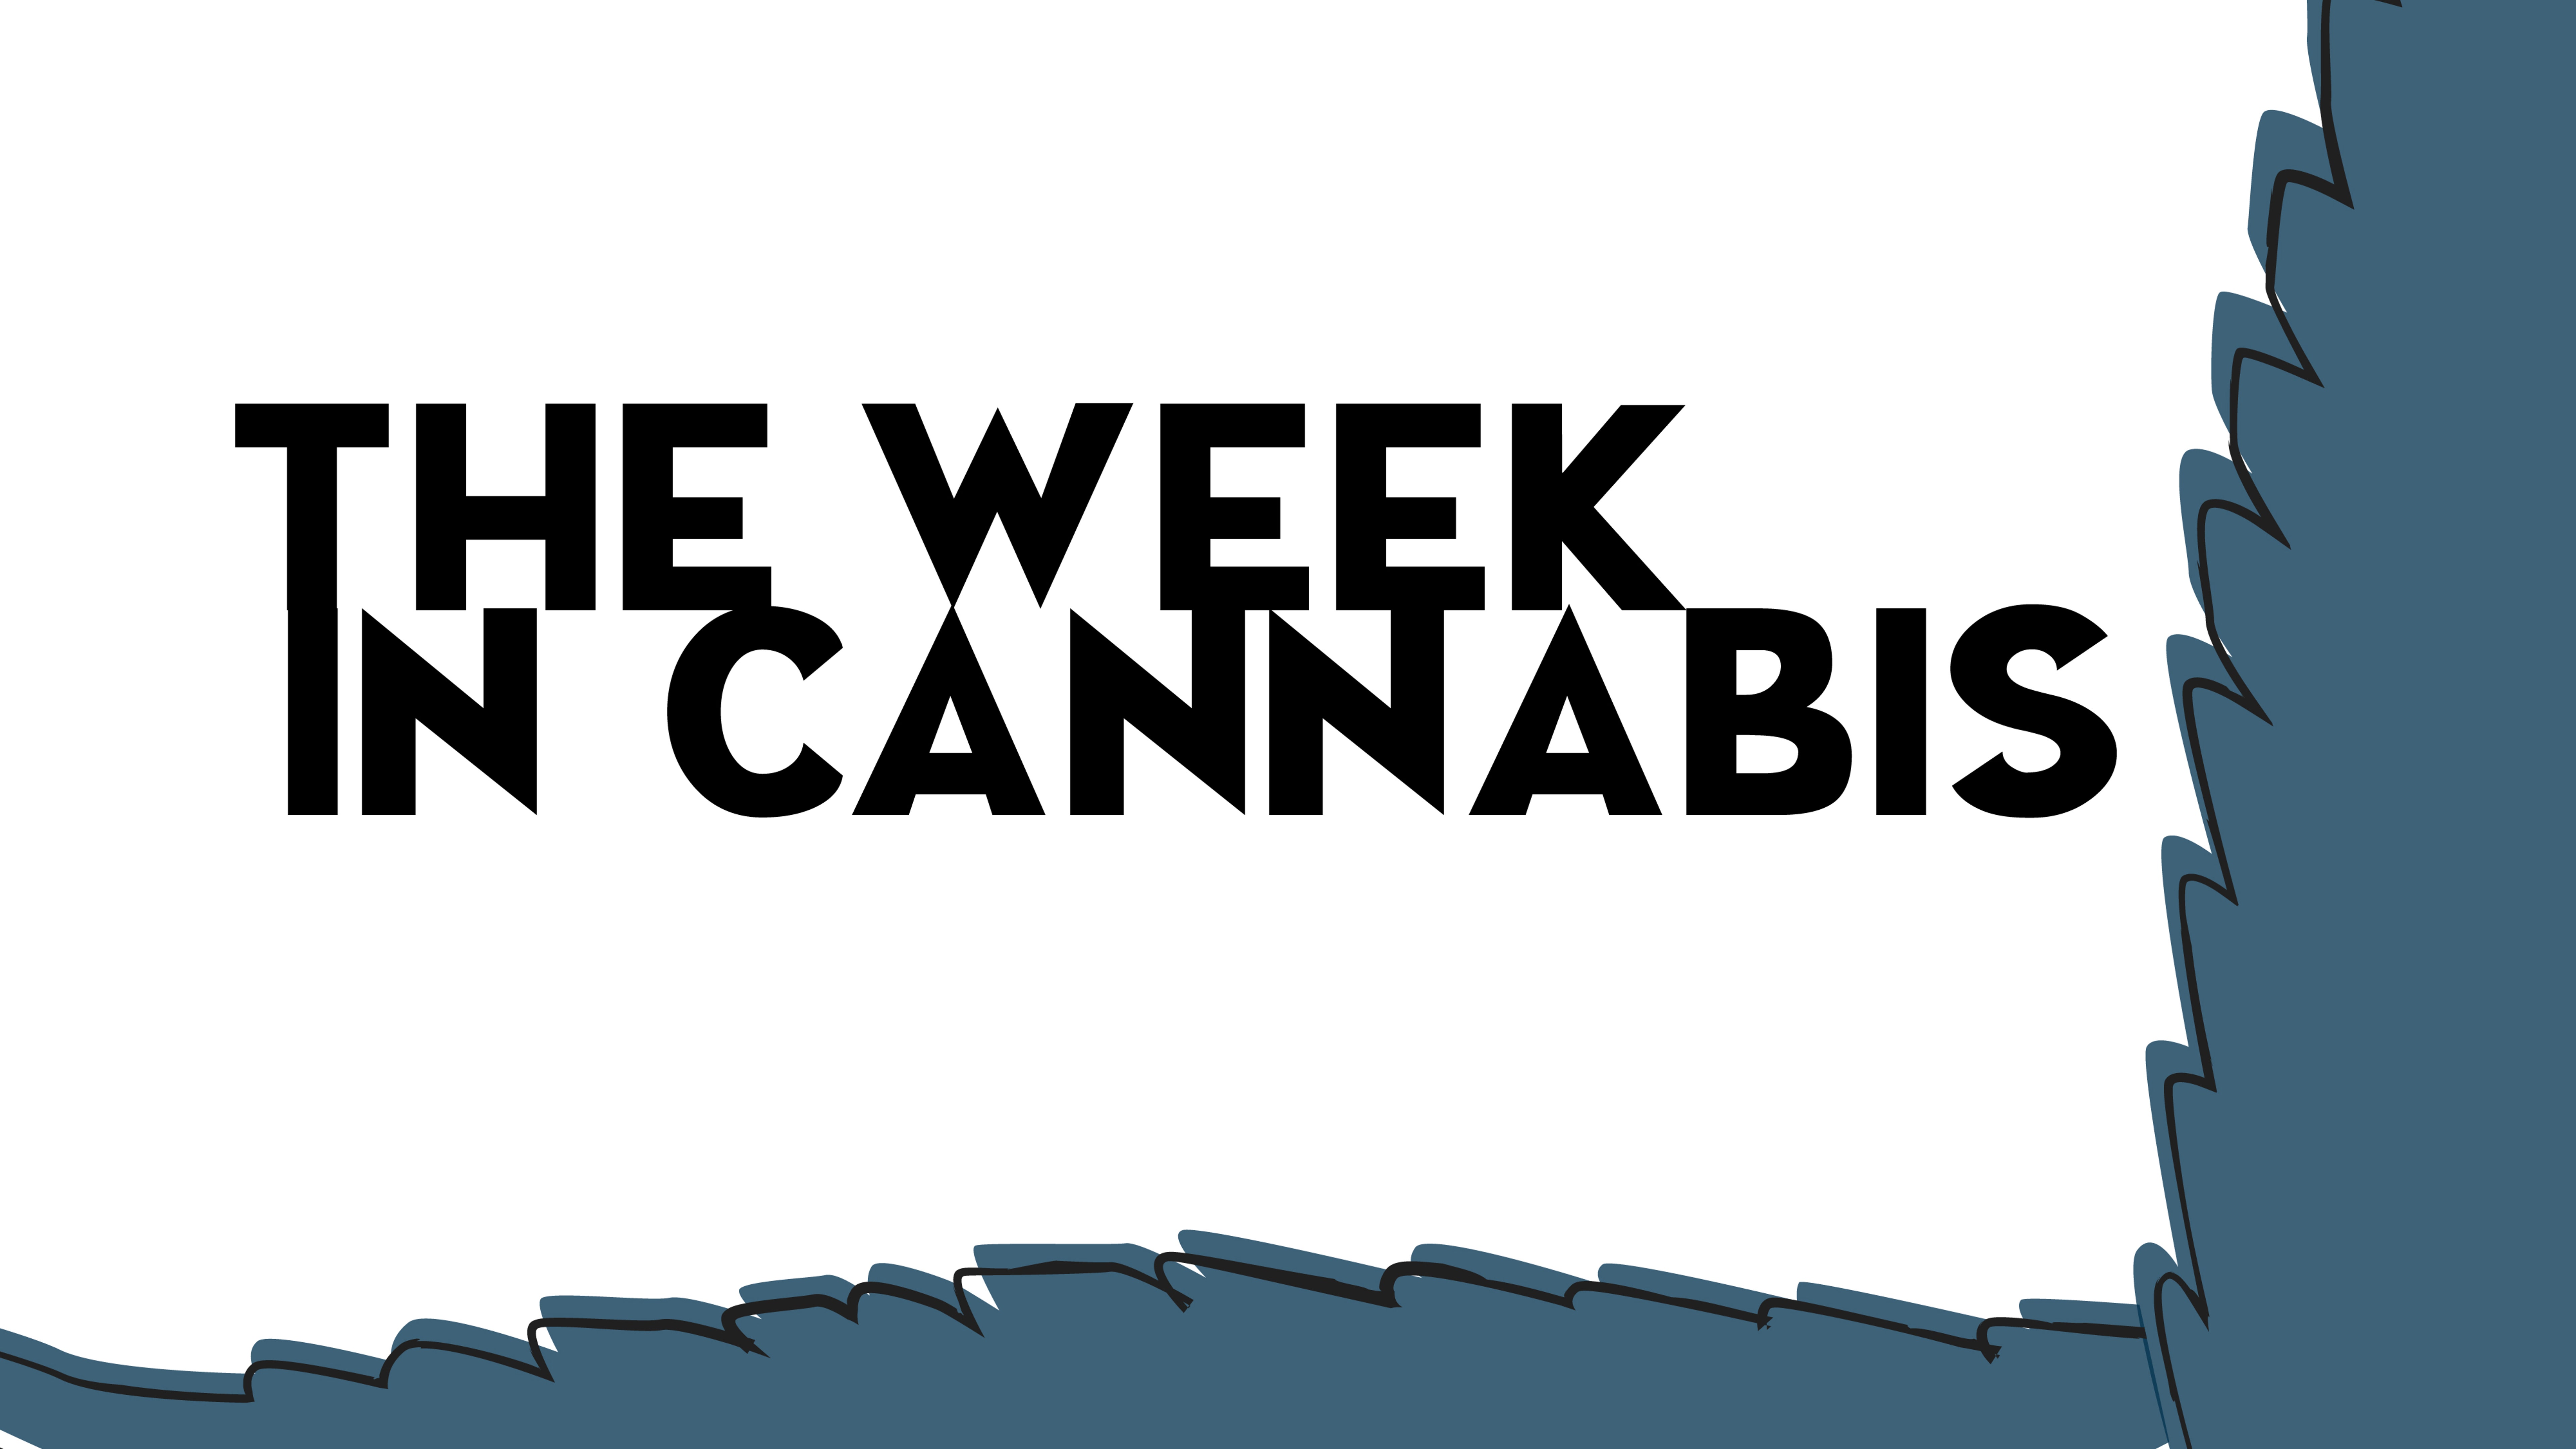 The Week In Cannabis: Amazon Supports Legalization, NY Expands Its Medical Program, Stocks Underperform And More